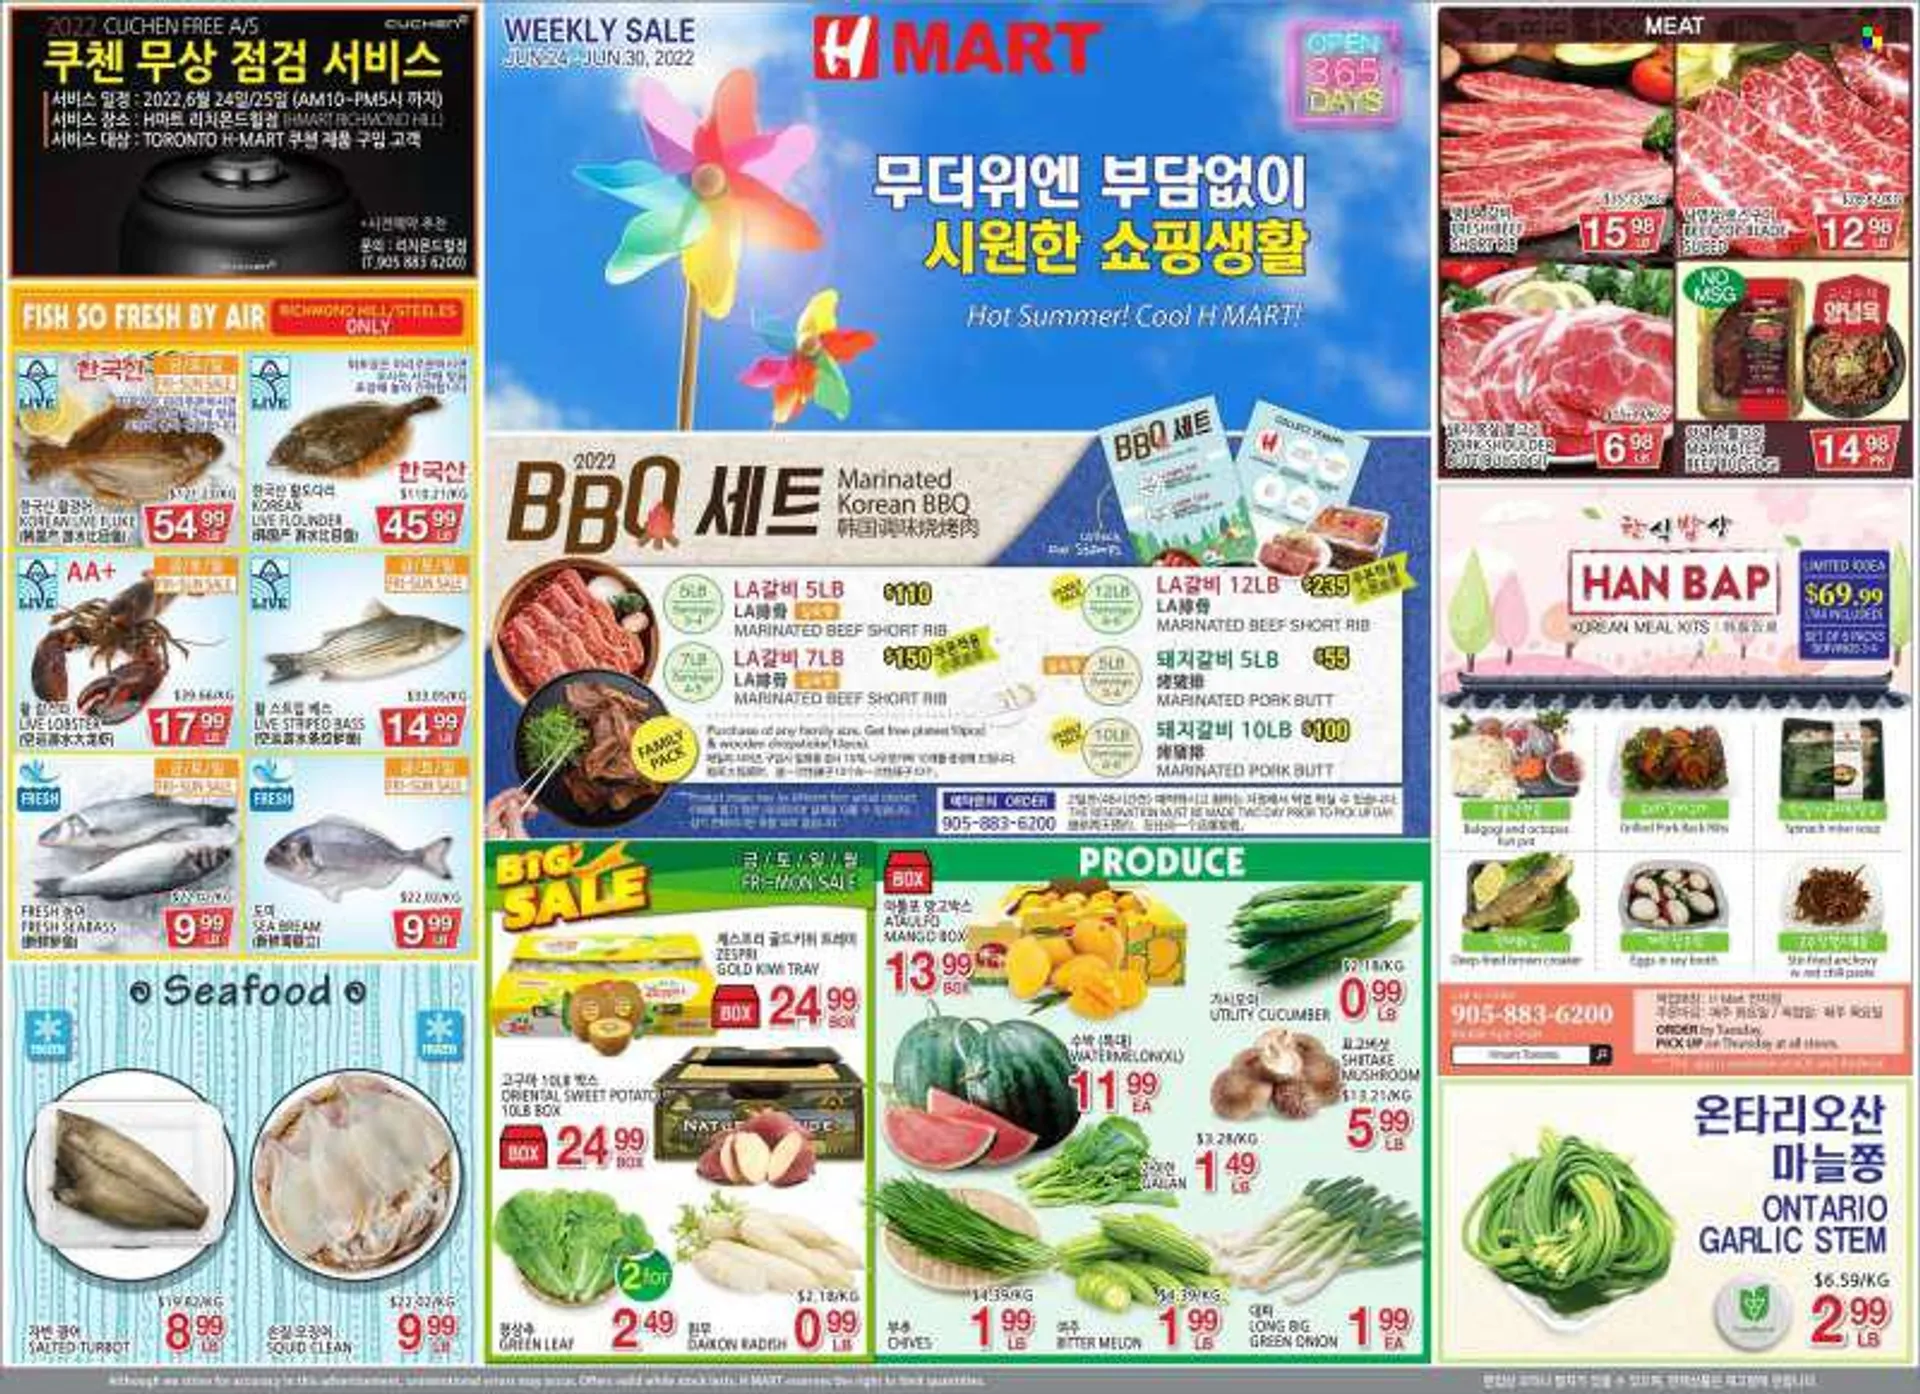 H Mart Flyer - June 24, 2022 - June 30, 2022 - Sales products - mushroom, garlic, radishes, spinach, sweet potato, green onion, chives, mango, watermelon, melons, flounder, lobster, sea bass, squid, octopus, turbot, seafood, fish, seabream, soup, eggs, br